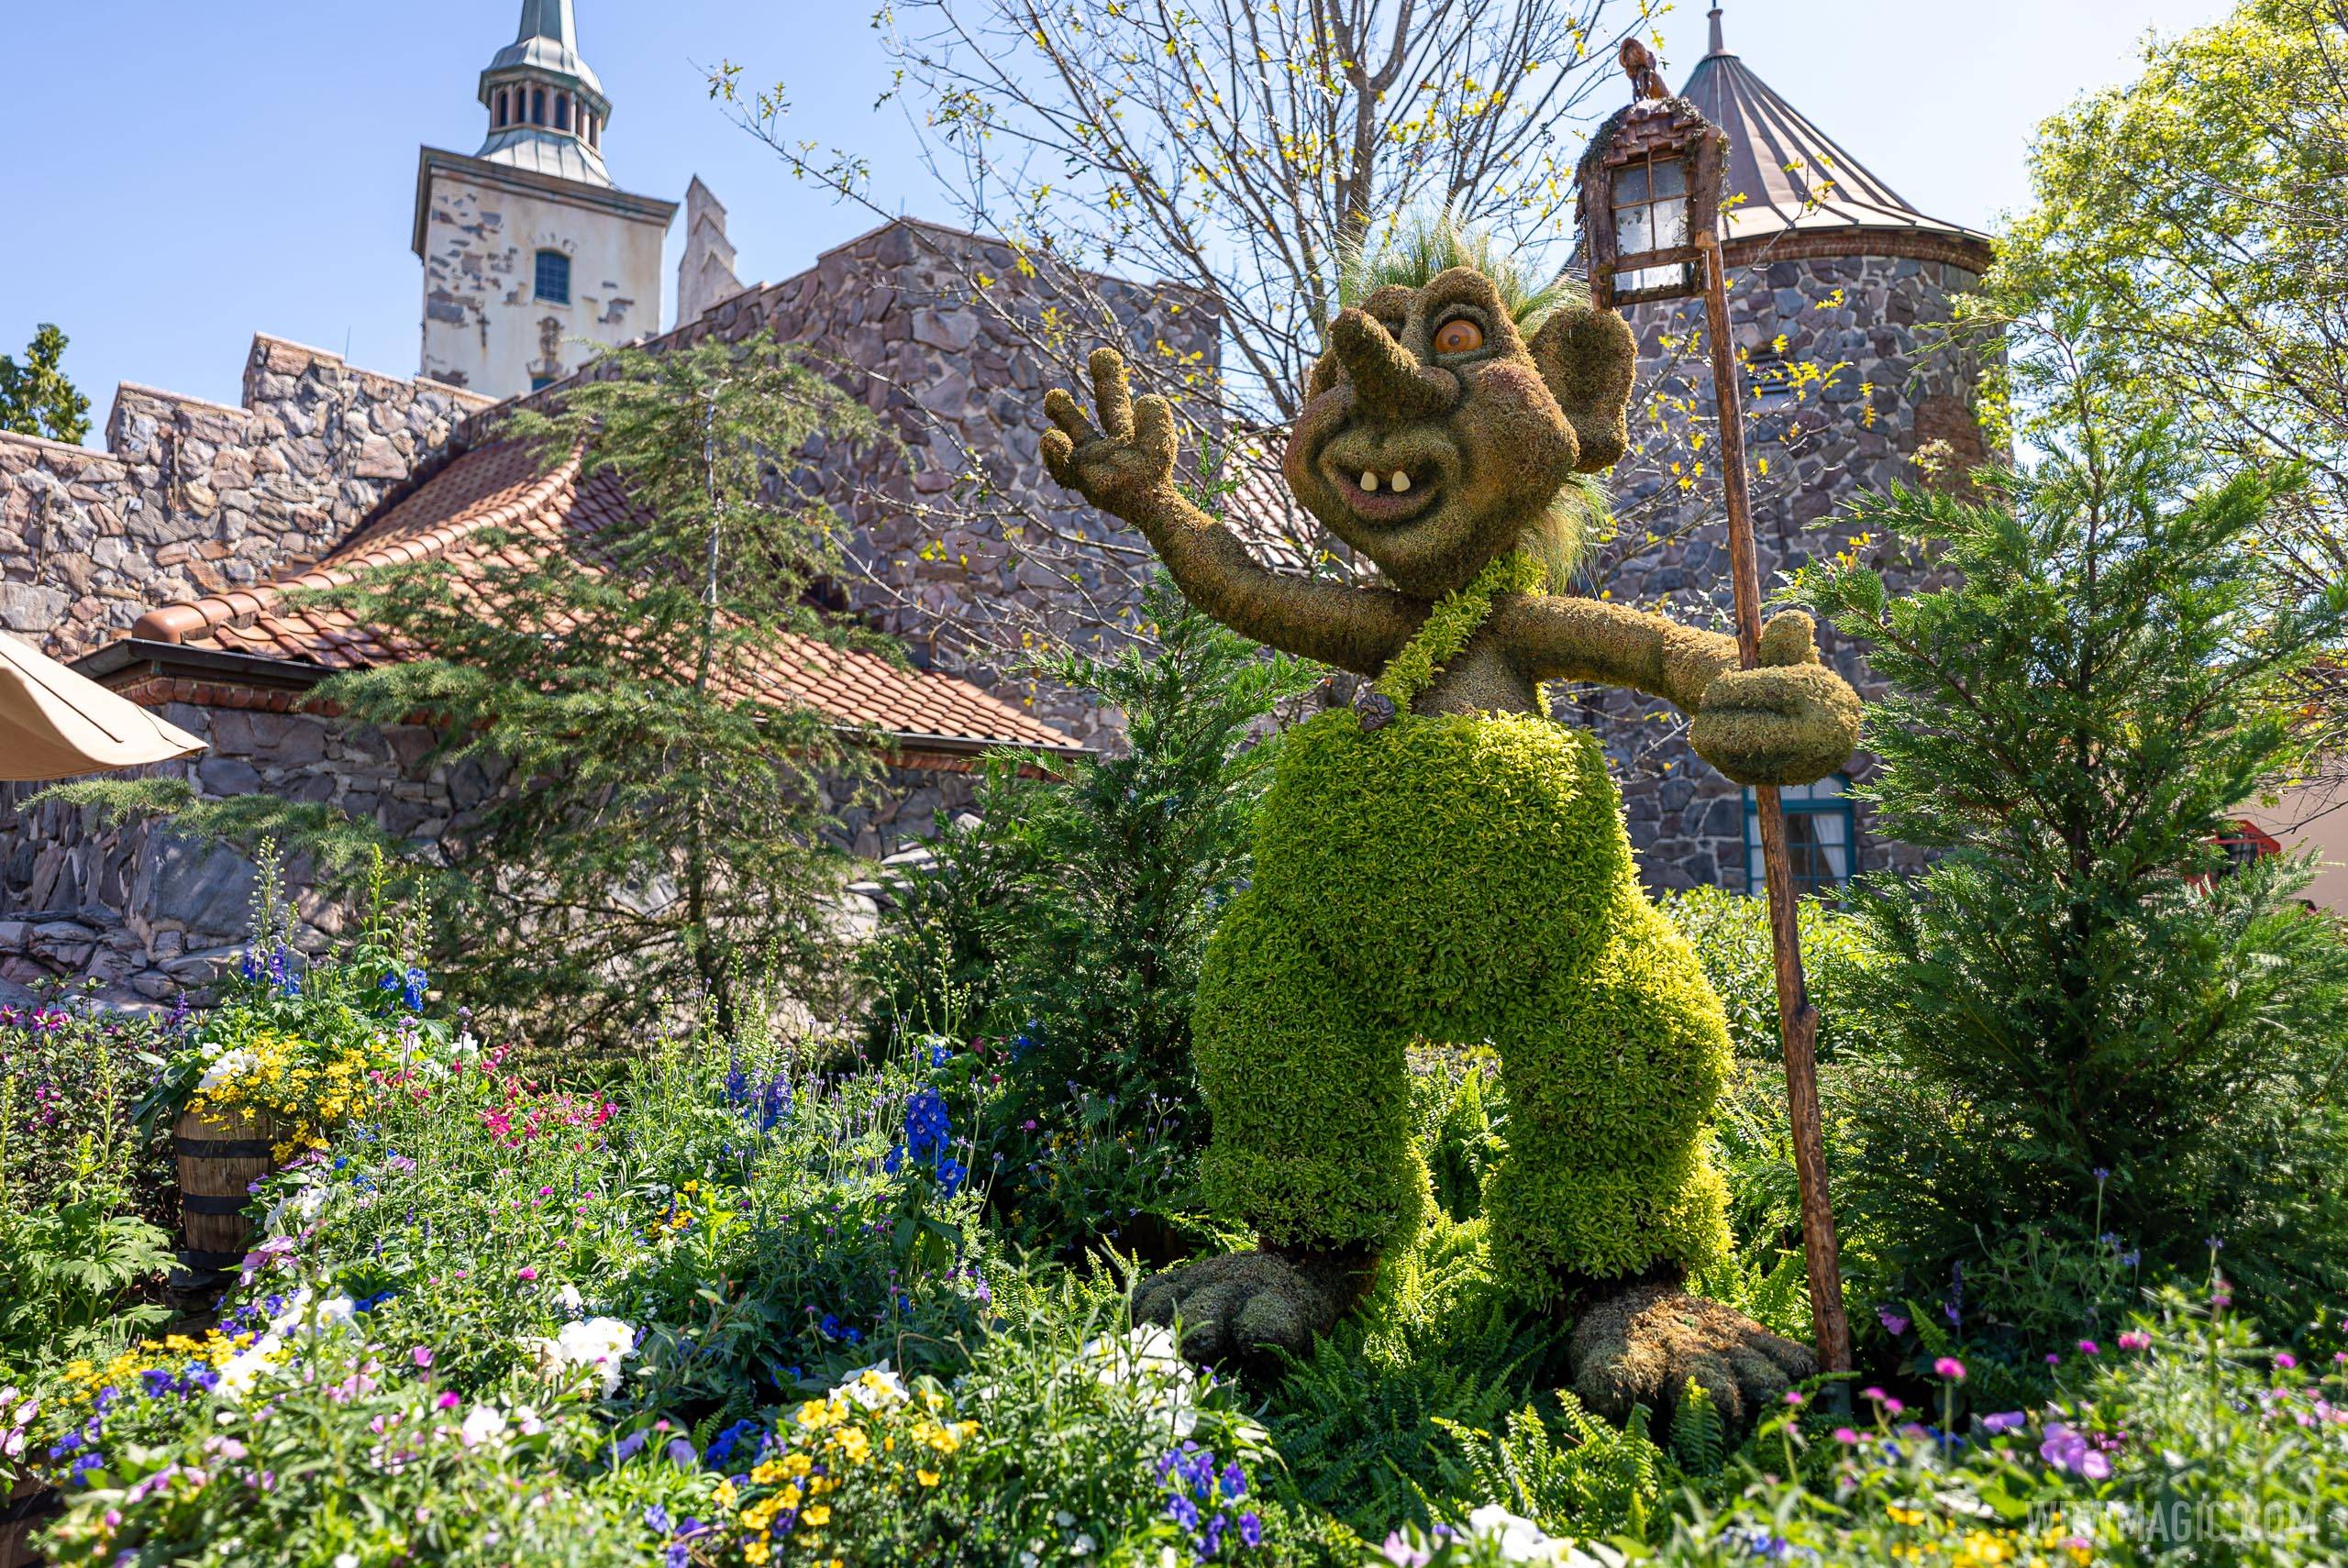 2021 Taste of EPCOT International Flower and Garden Festival topiary and gardens